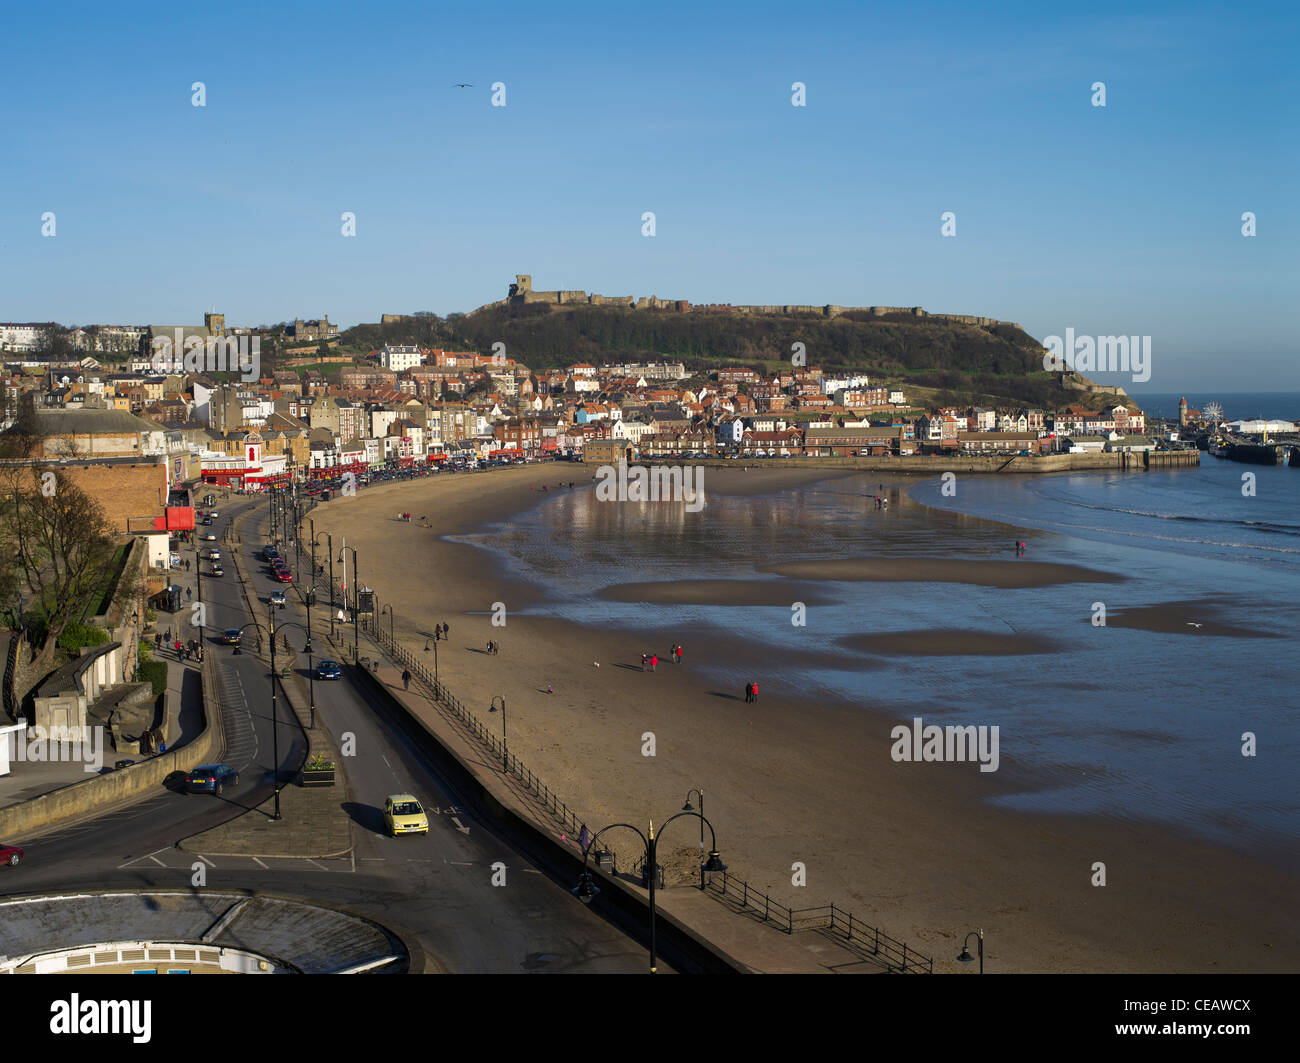 dh  SCARBOROUGH NORTH YORKSHIRE South Bay promenade and beach Scarborough Castle winter uk seaside resort Stock Photo